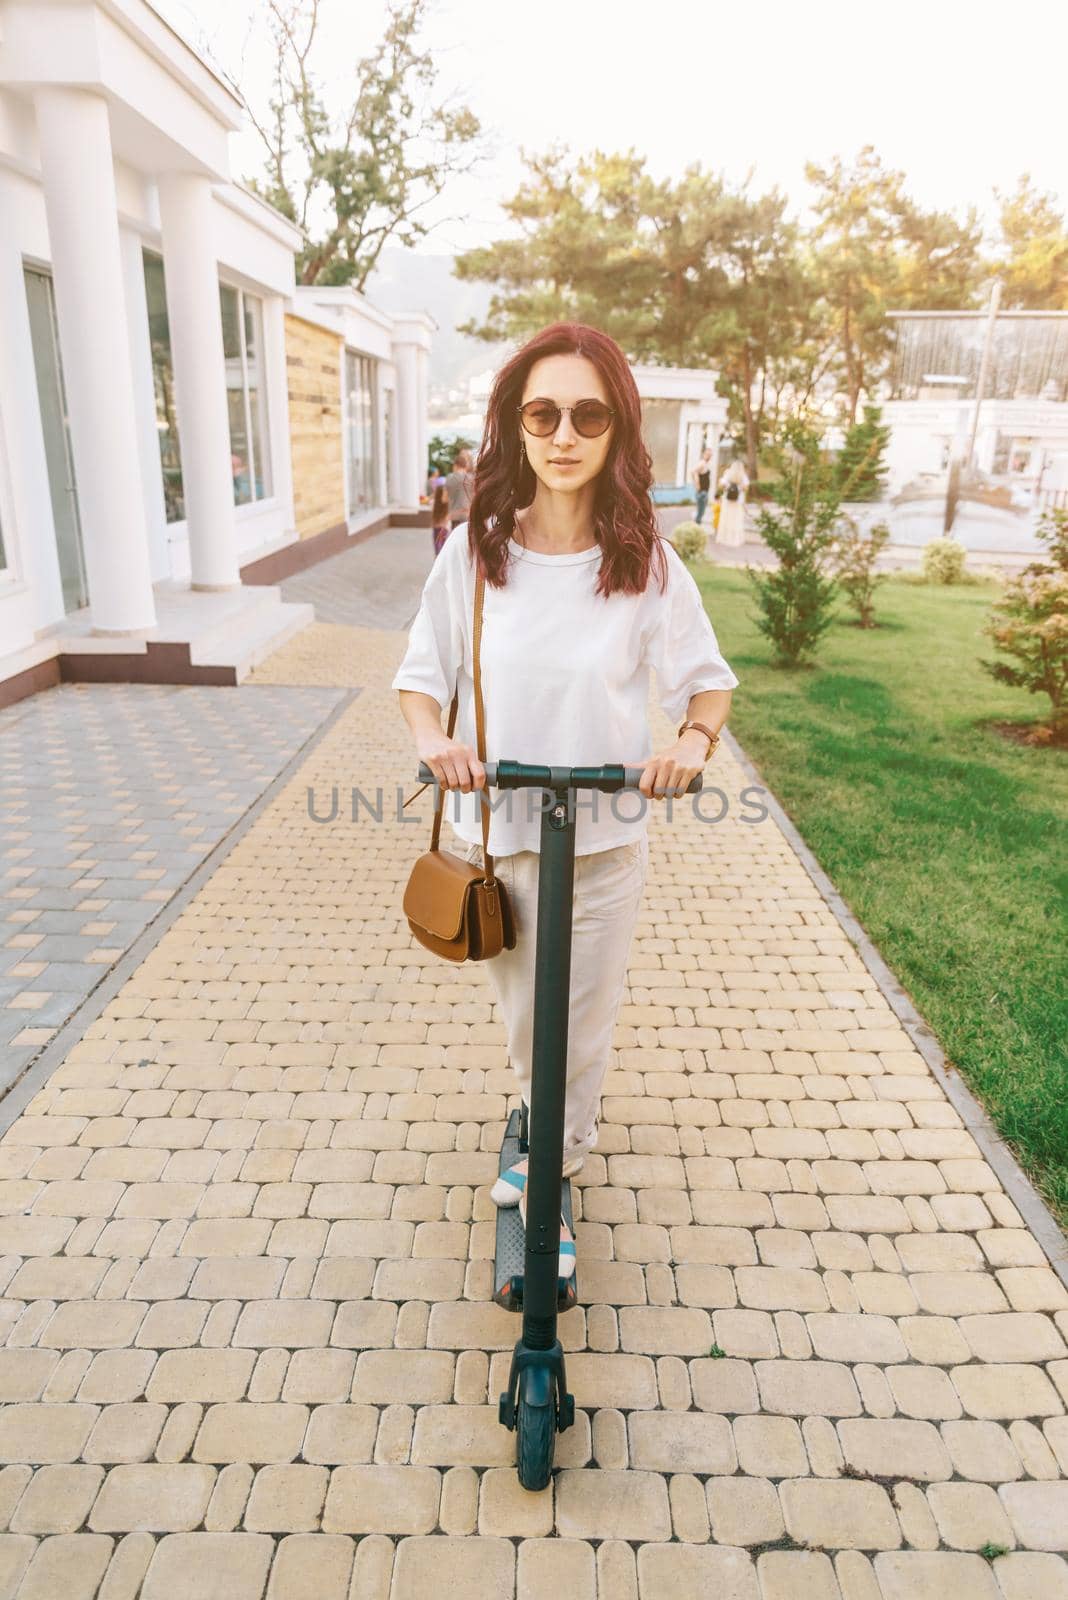 Modern woman riding an eco electric scooter in city park. by alexAleksei